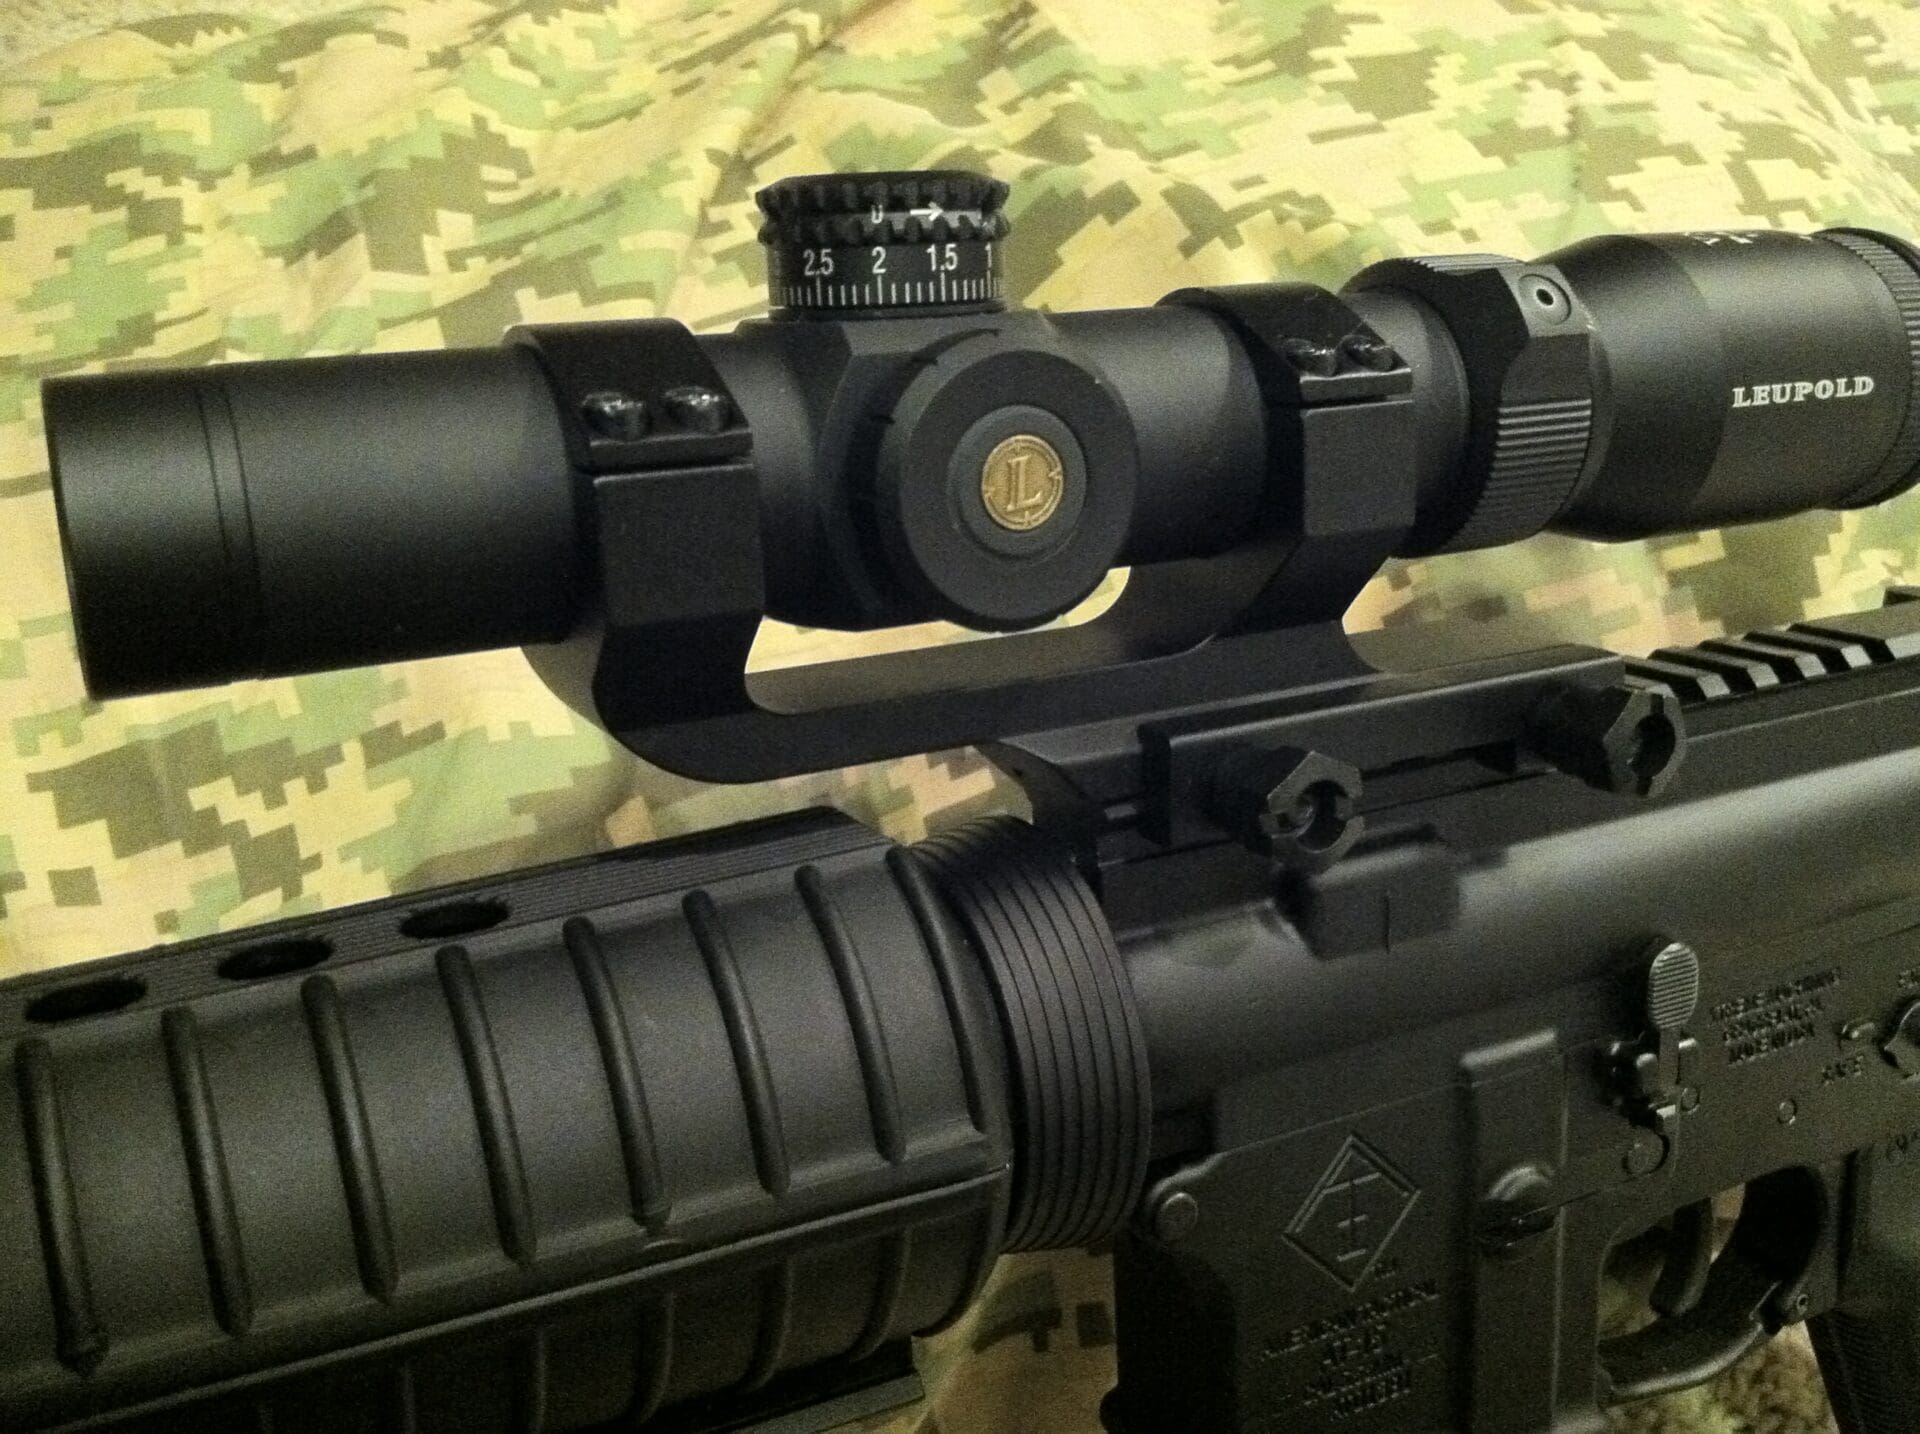 Handle Carry Mount Ar15 Scope Scopes Arms Primary Deluxe Ar Sight Rifle Gea...